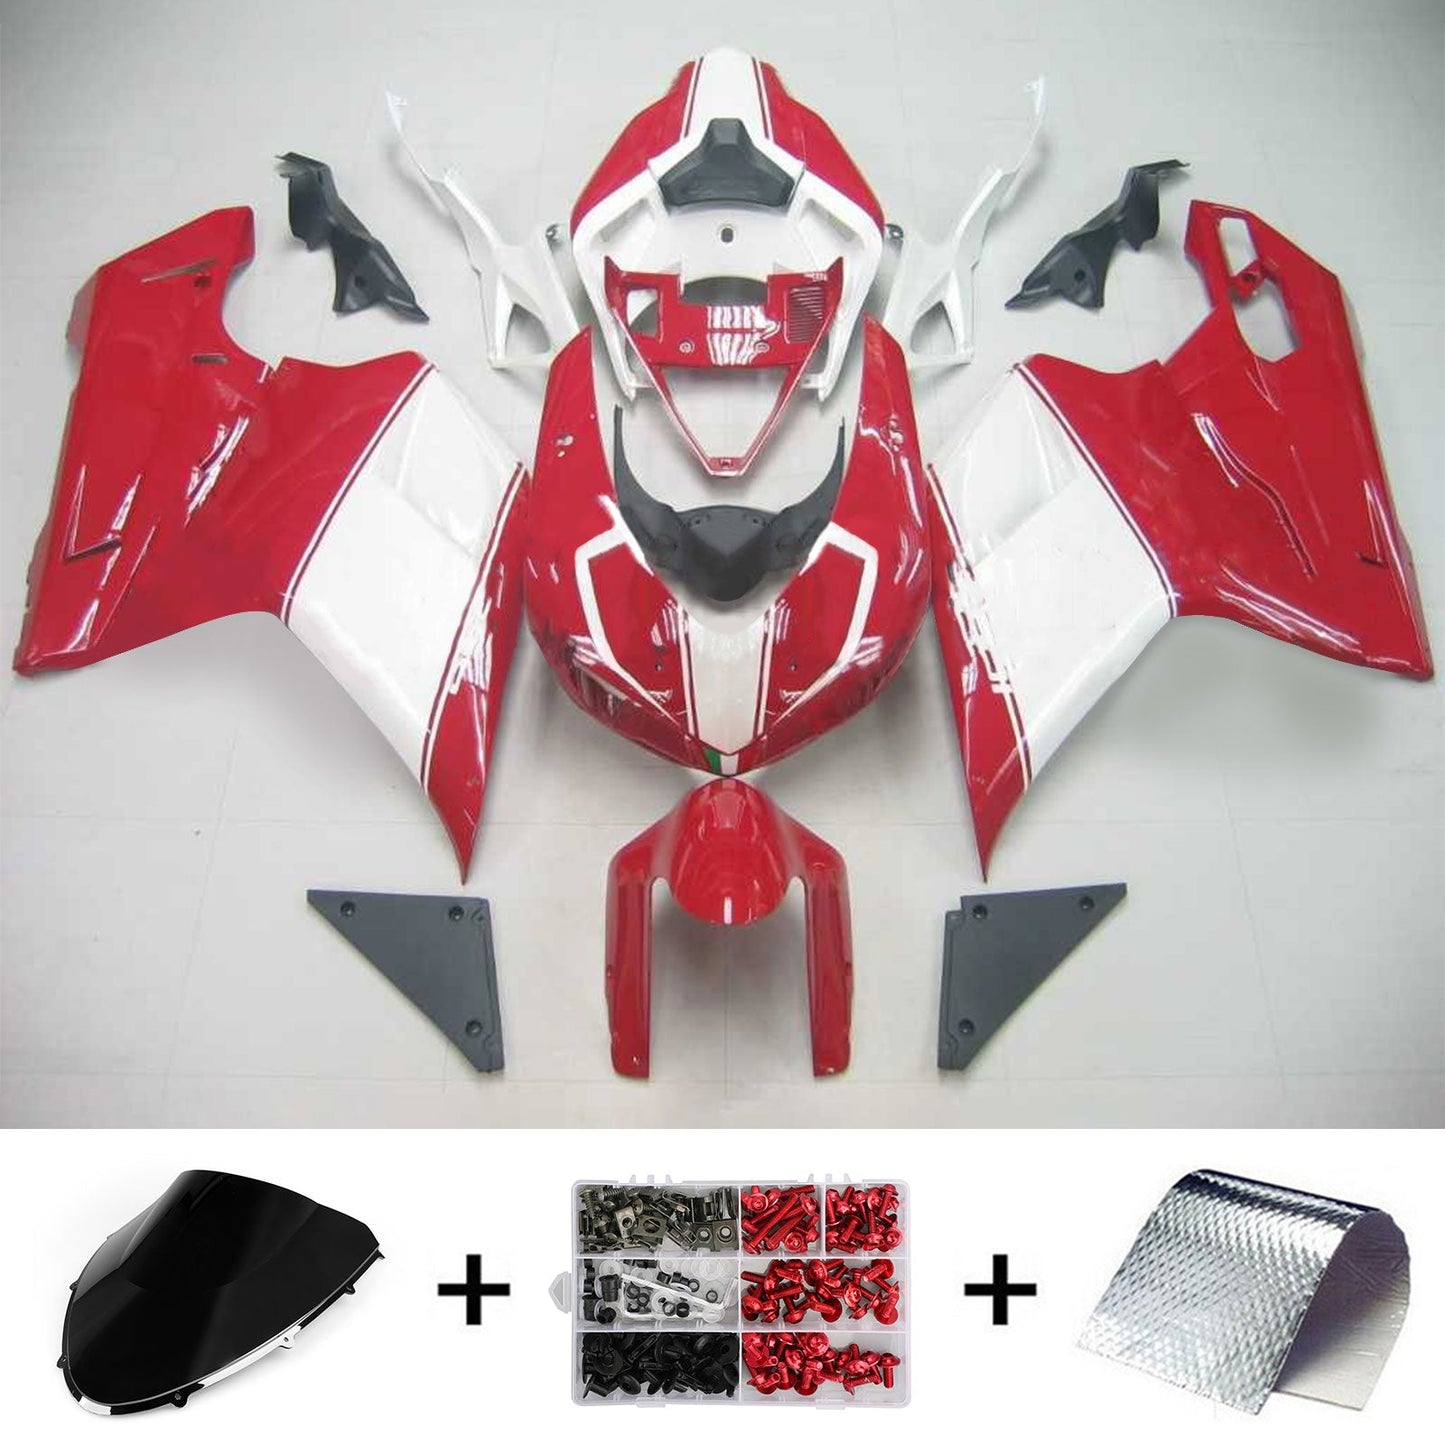 Amotopart Ducati 2007-2011 1098/1198/848 Red White Faxing Kit